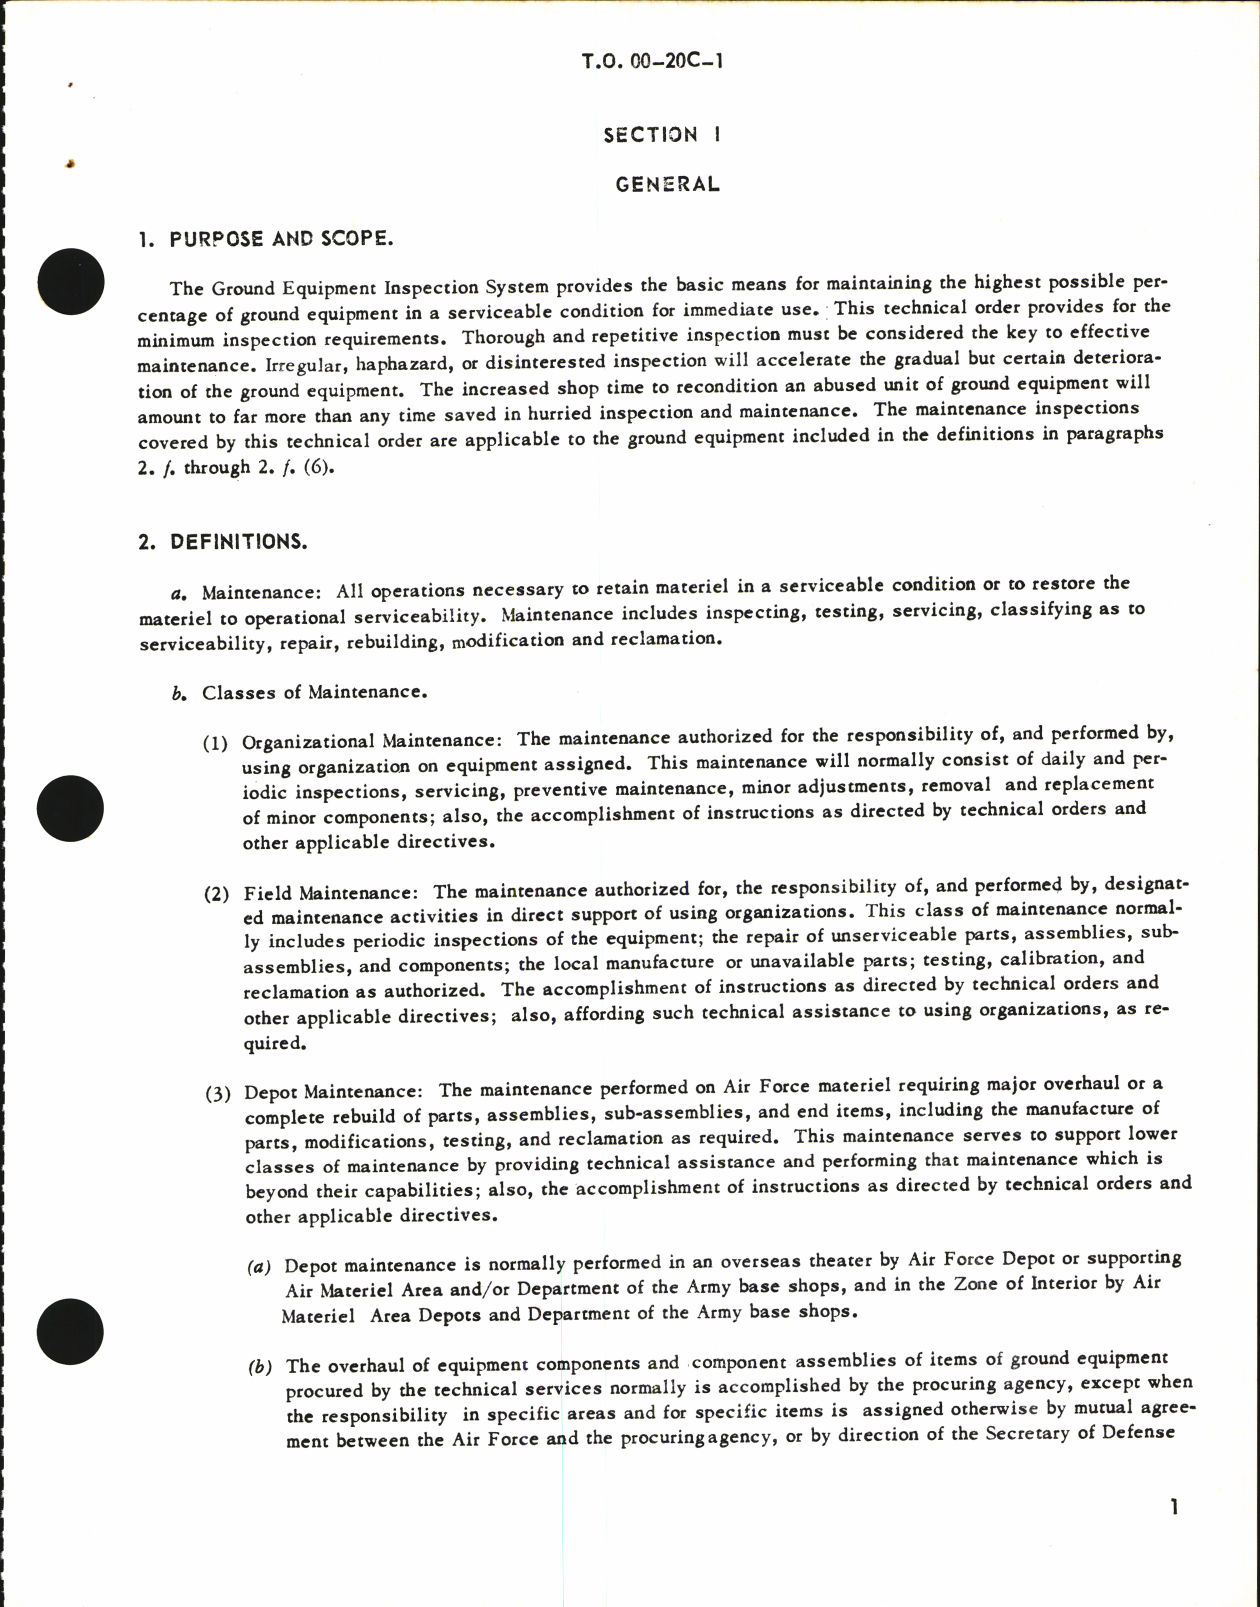 Sample page 7 from AirCorps Library document: Ground Equipment Inspection System